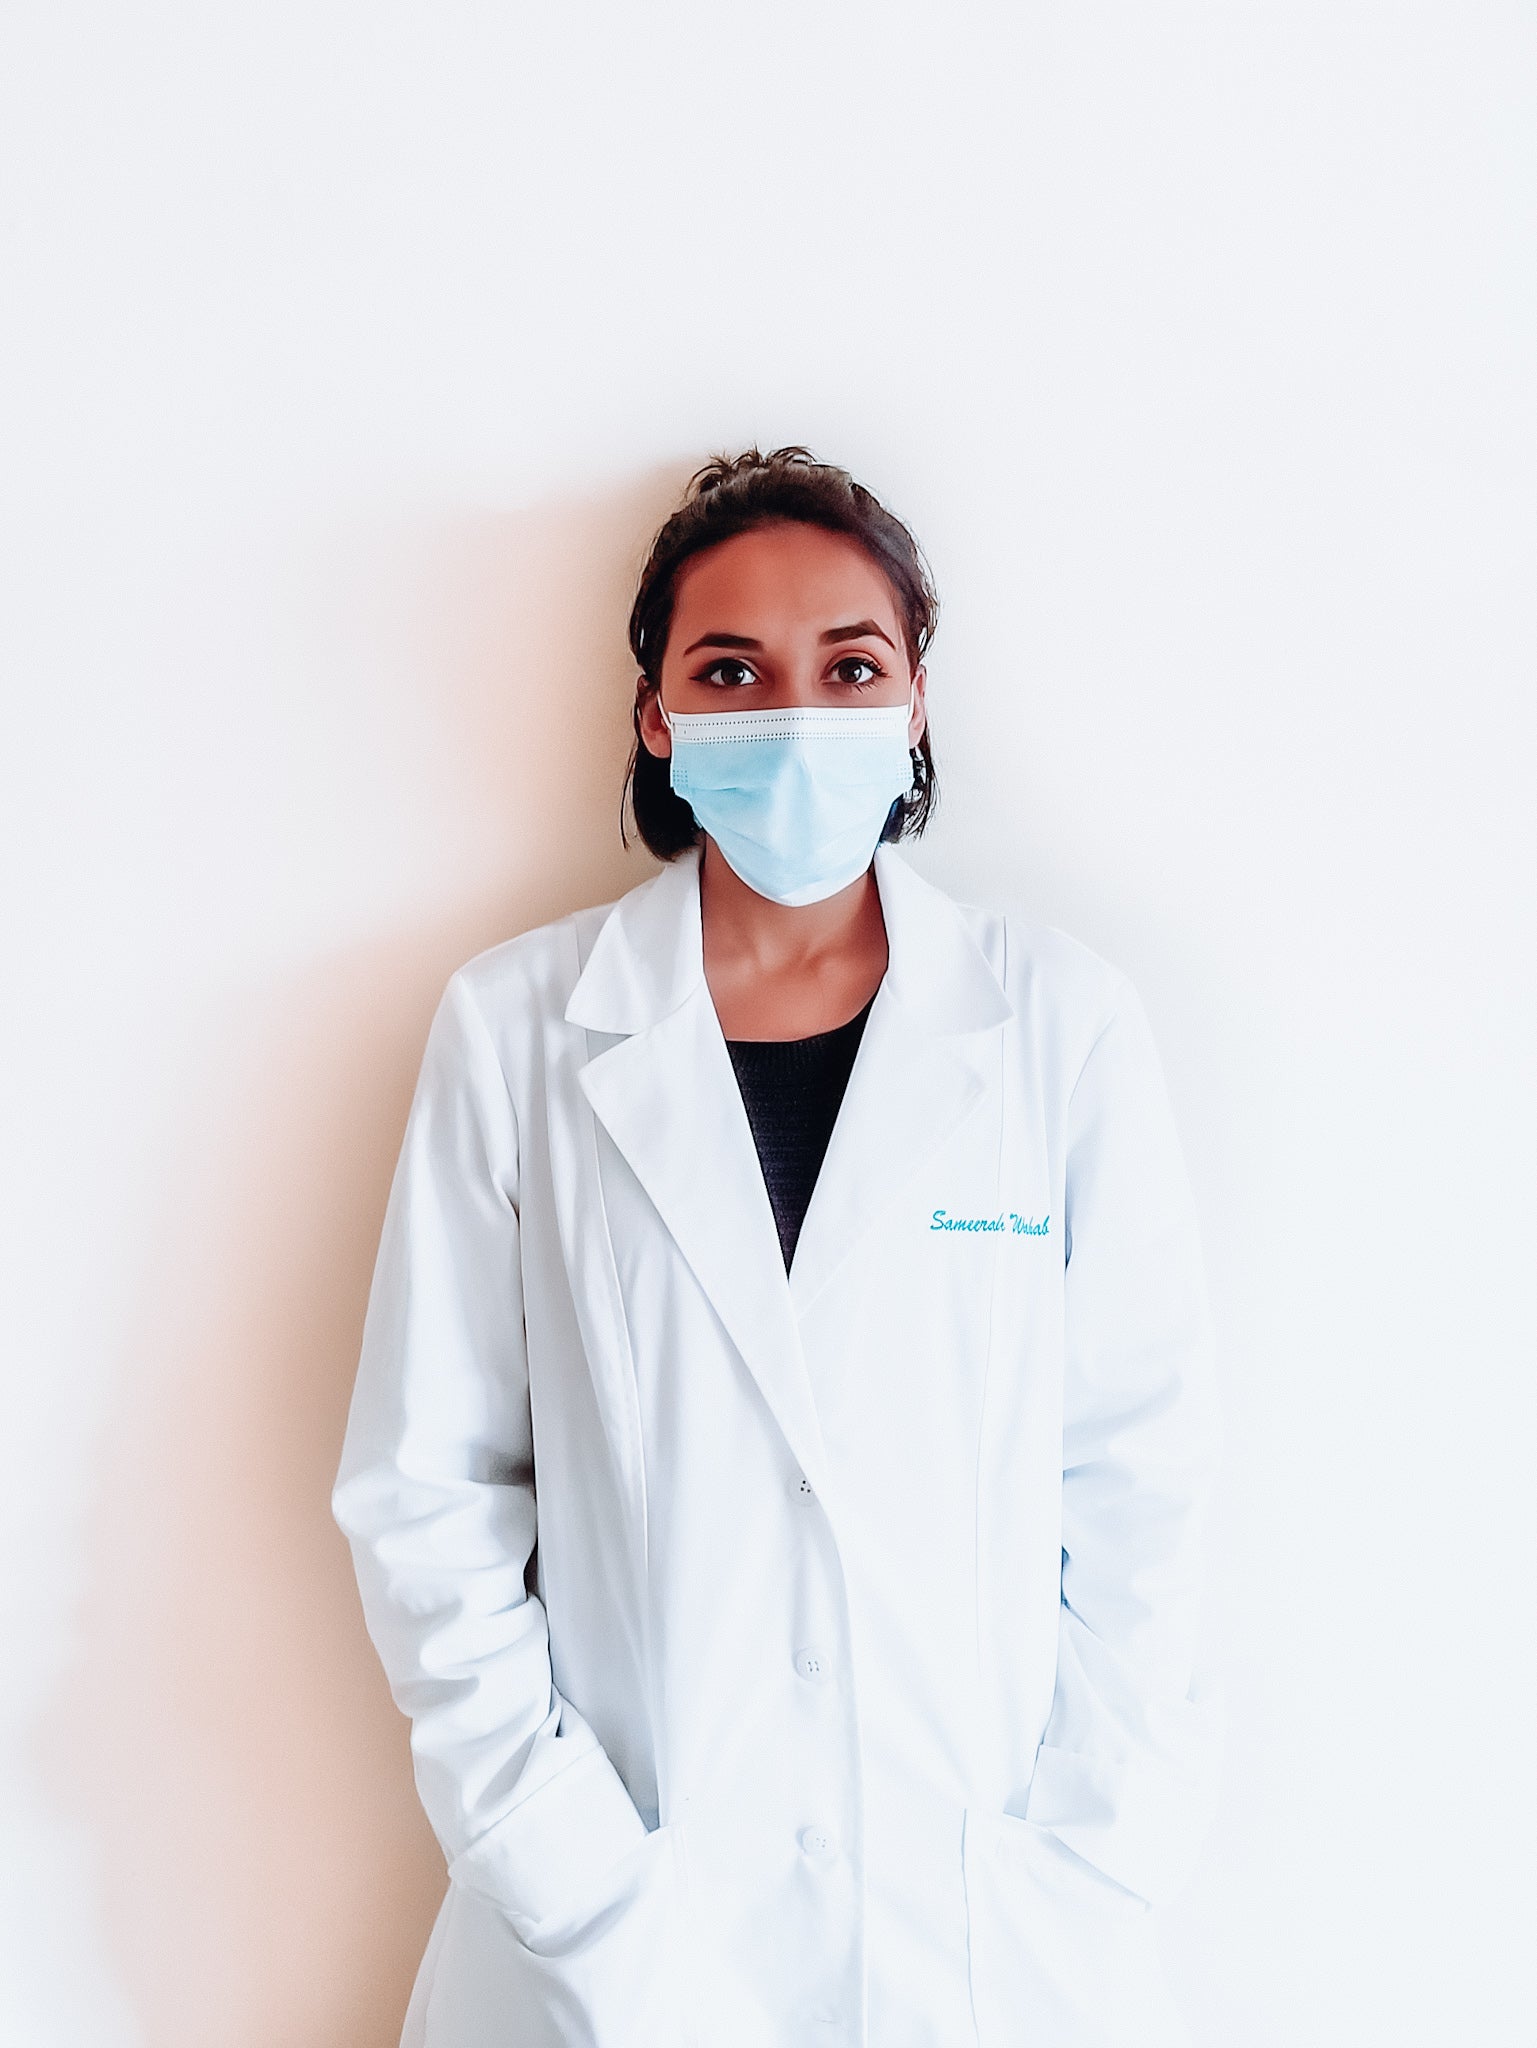 Surgical Masks, Cloth Masks and Carbon Filters: What's The Most Effective?